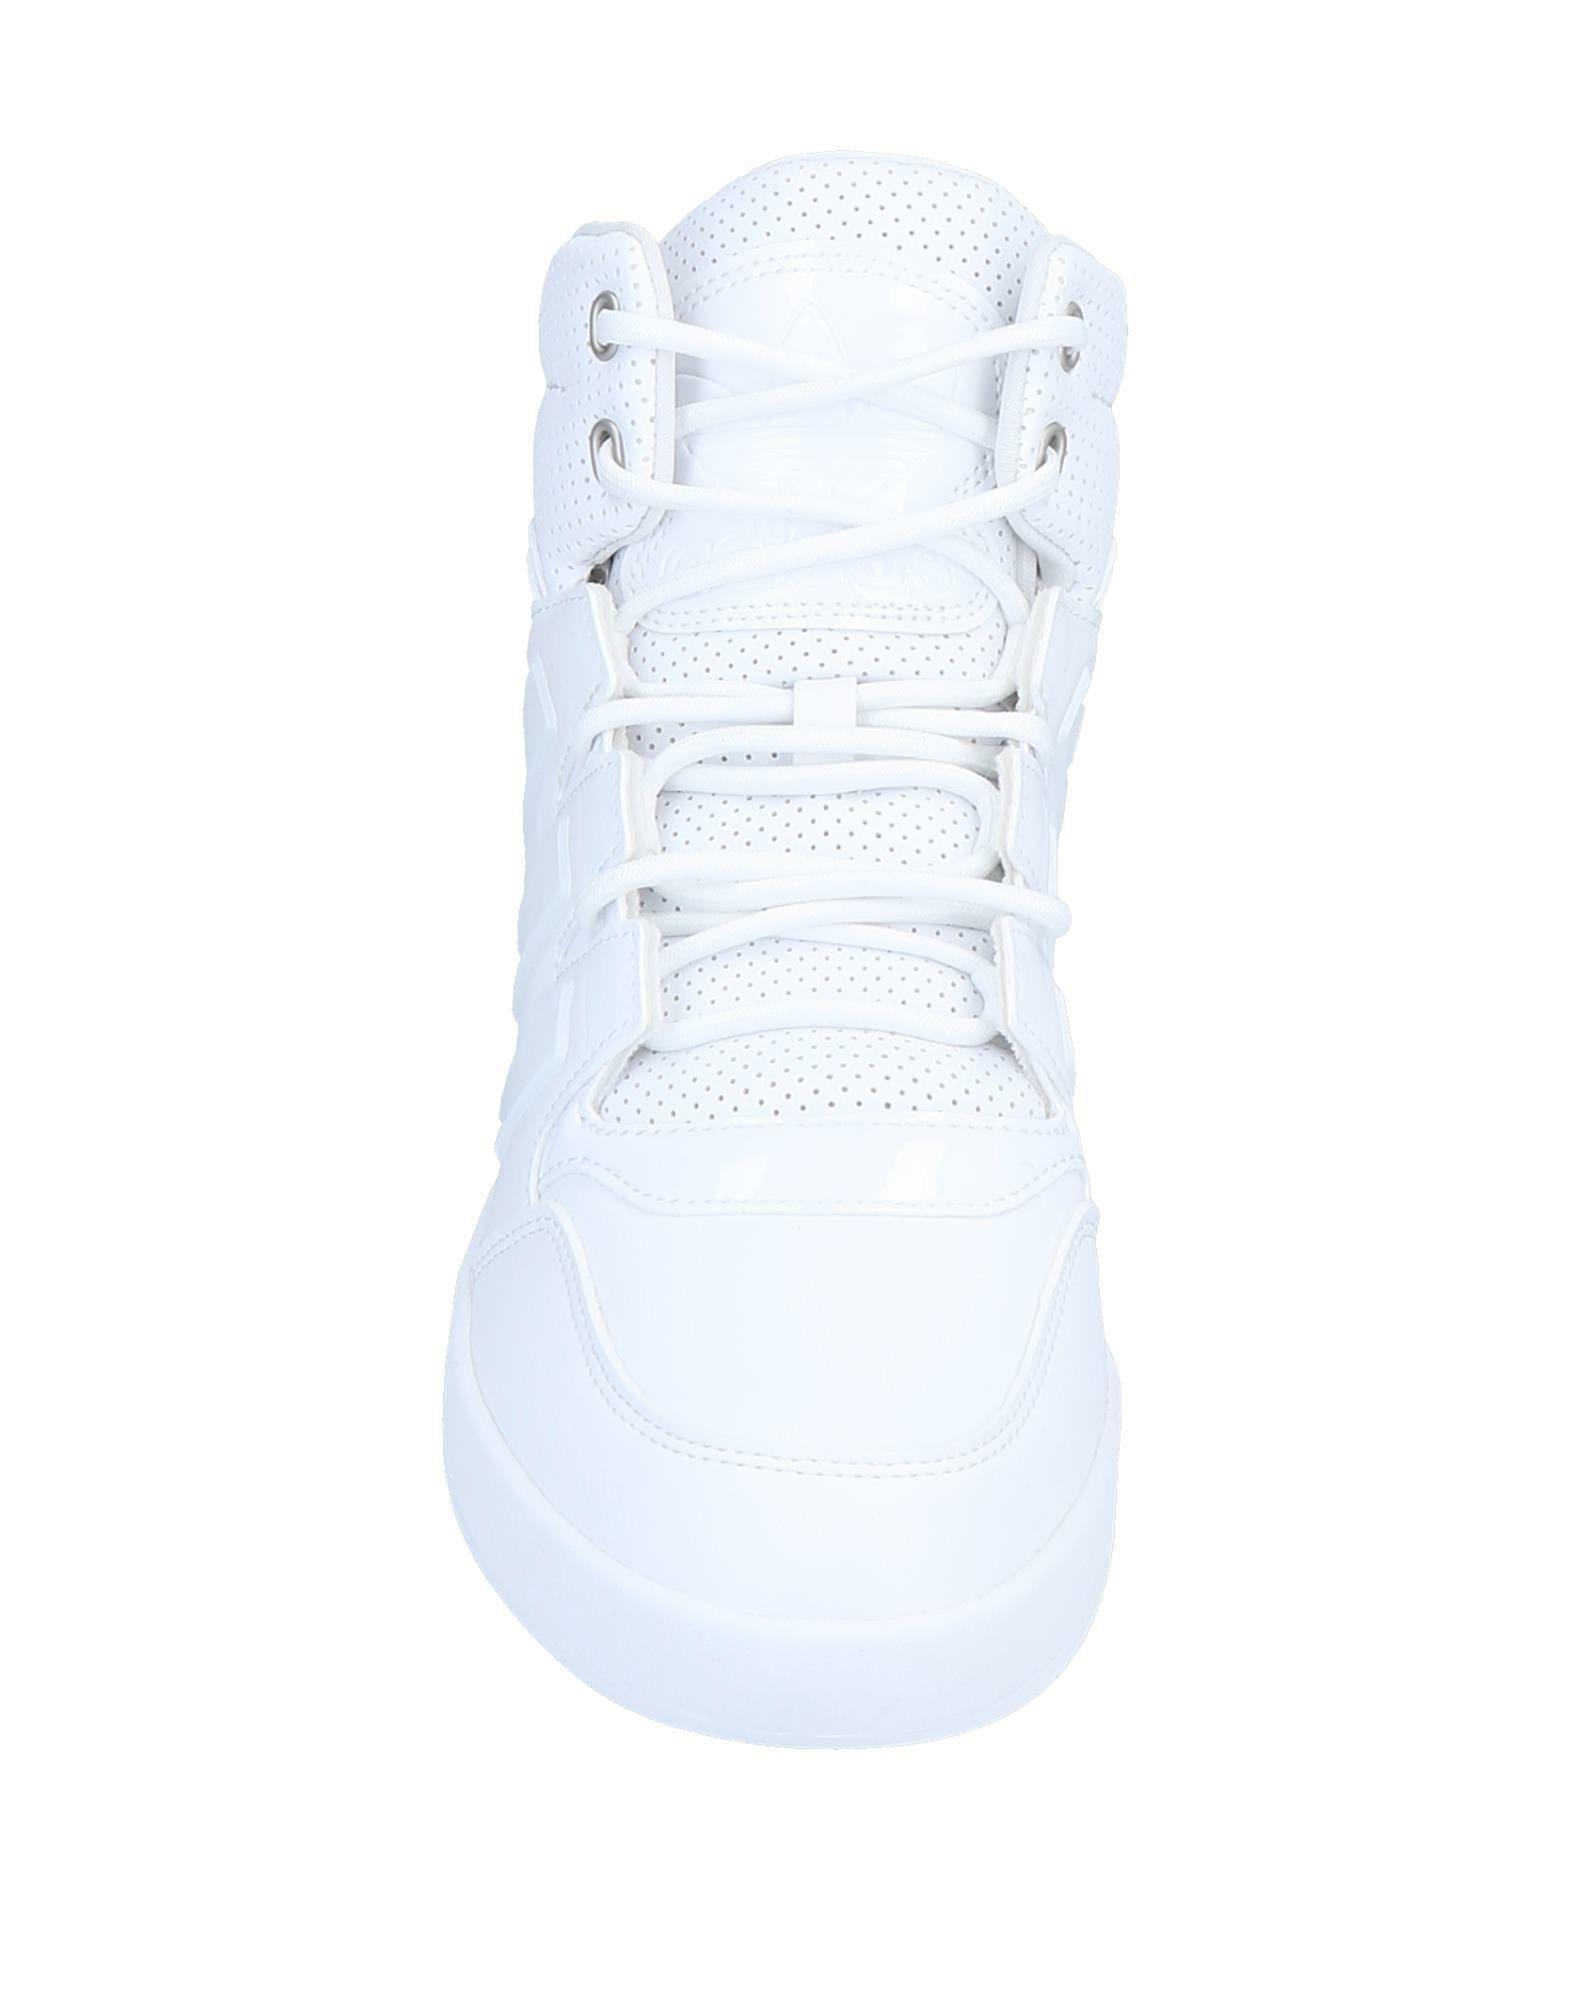 adidas High-tops & Sneakers in White for Men - Lyst